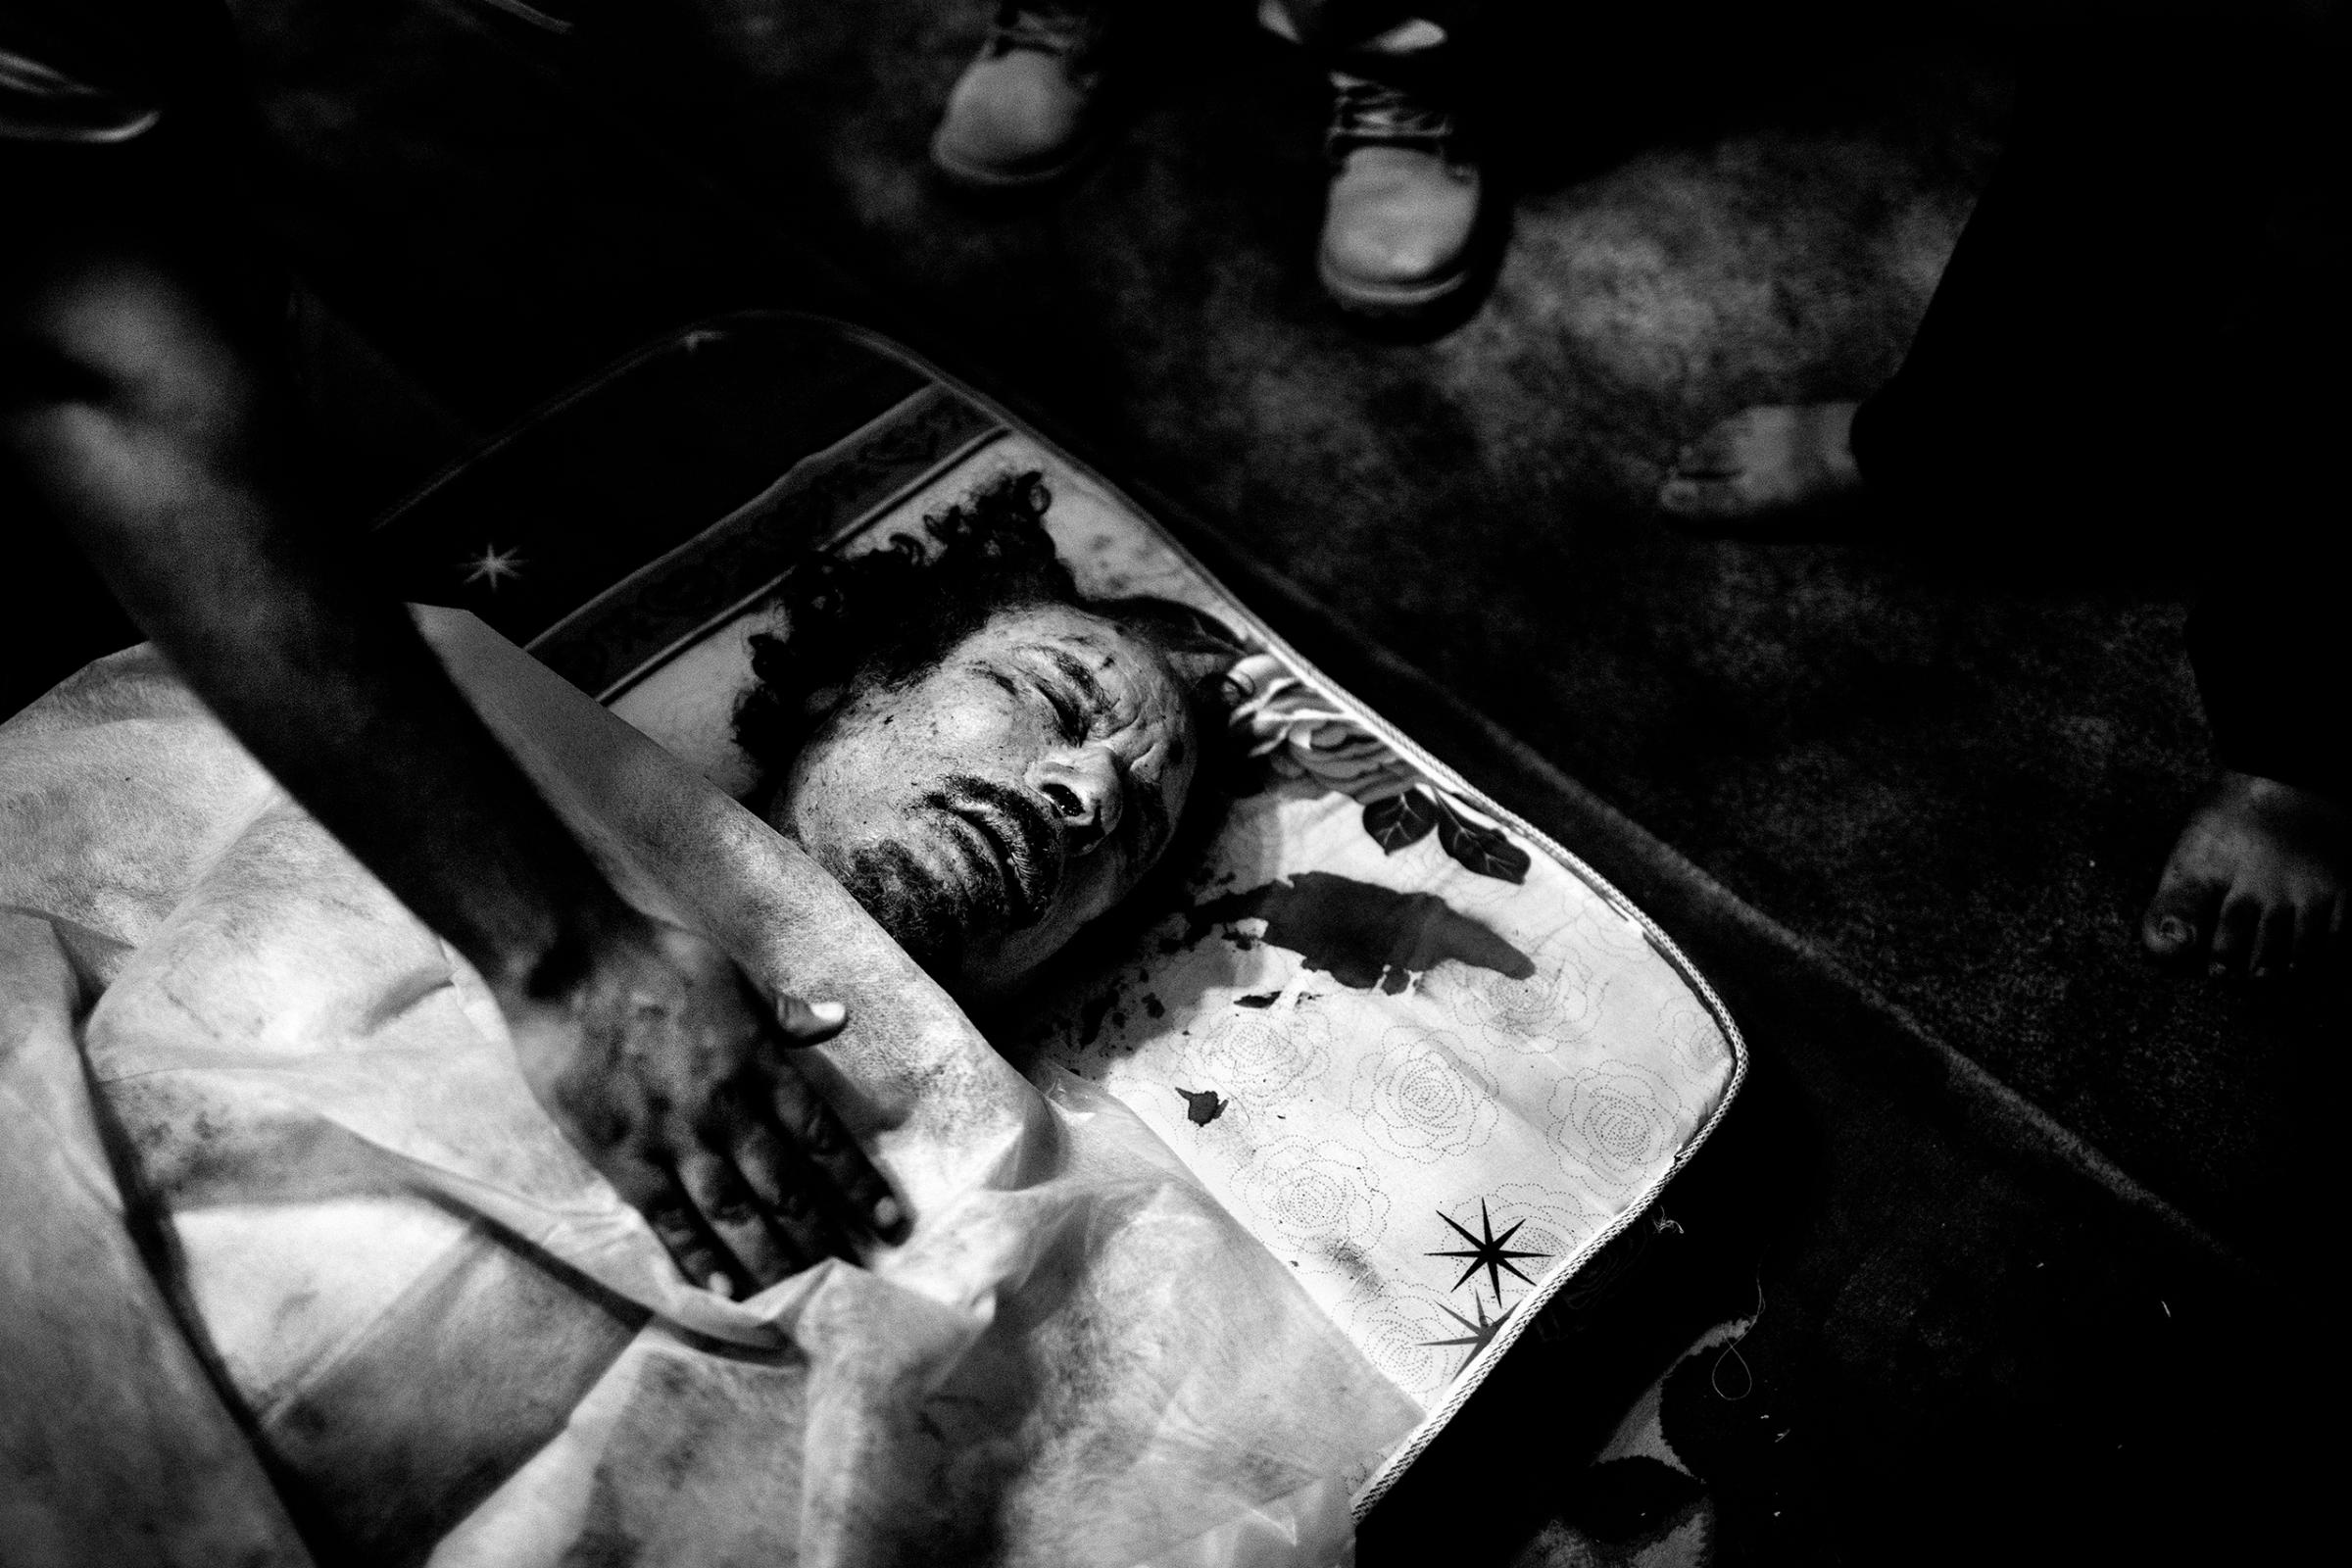 The corpse of Libyan leader Muammar Gaddafi in a rebel's home in Misurata, Libya, Oct 20, 2011, the day he was killed.